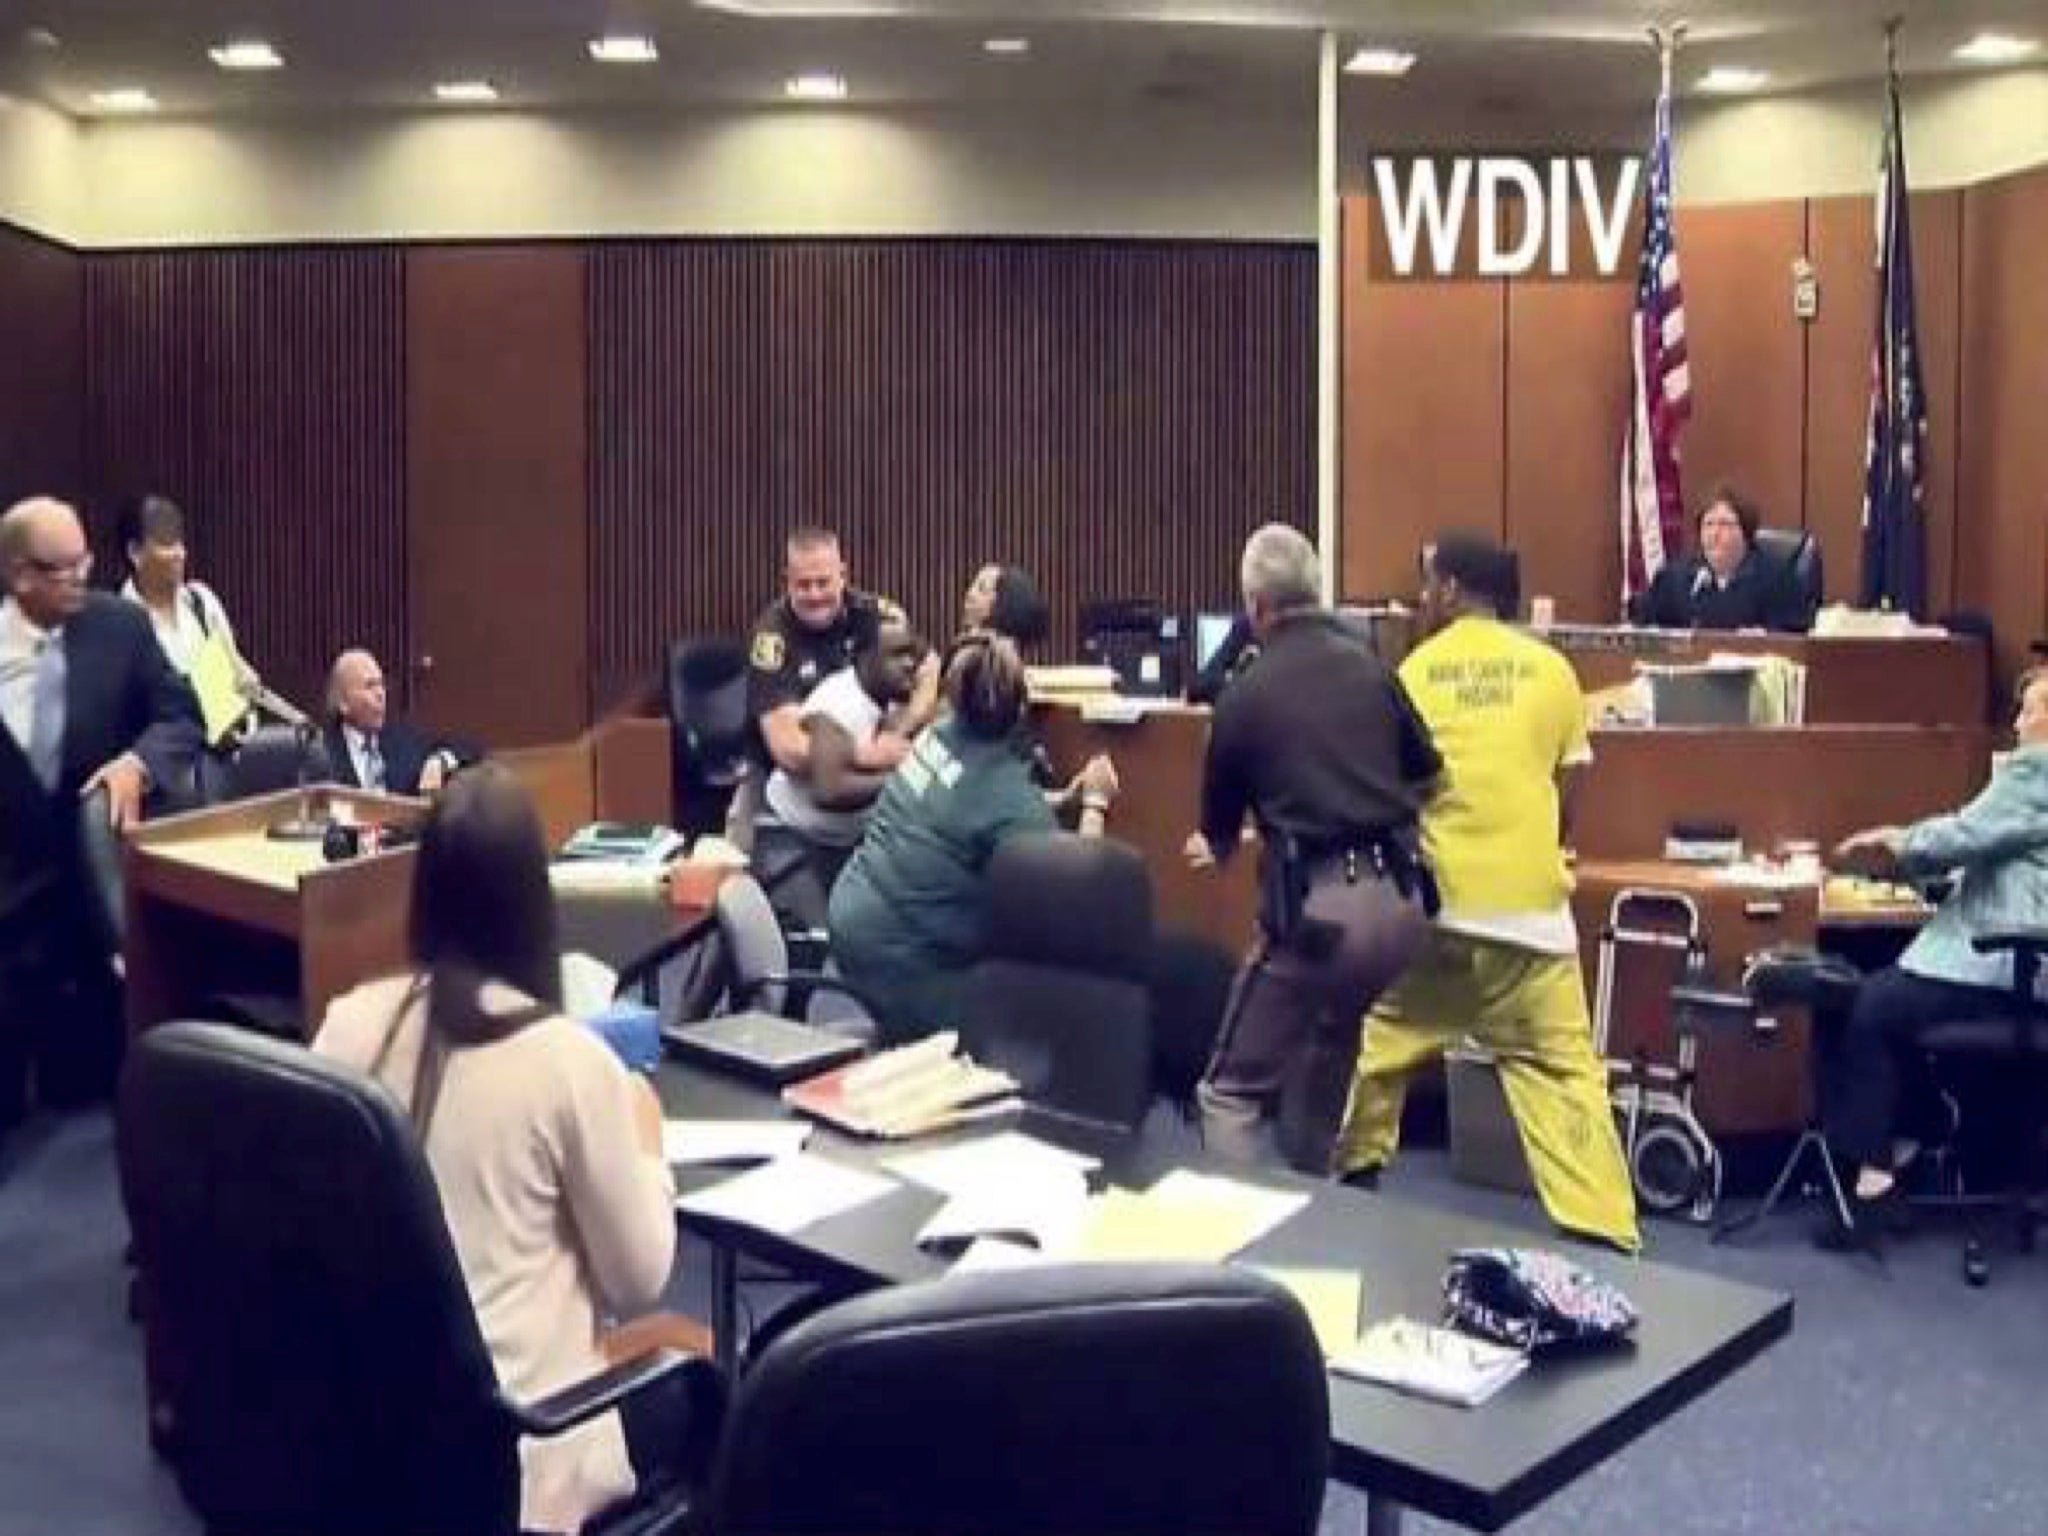 Chaos Breaks Out In Courtroom As Father Attacks Killer Of